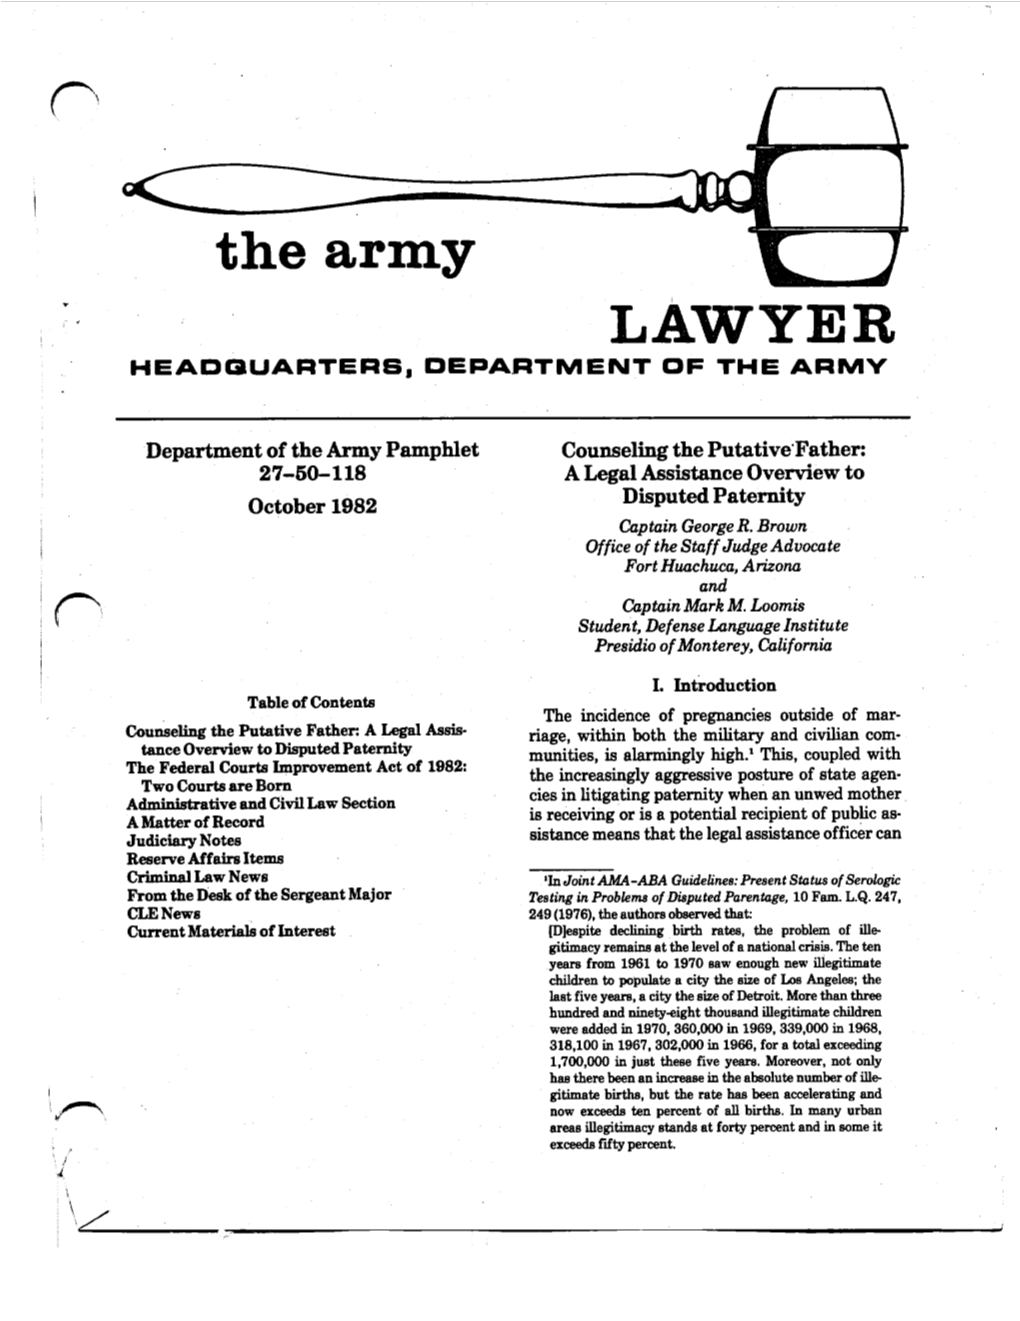 The Army Lawyer (Oct